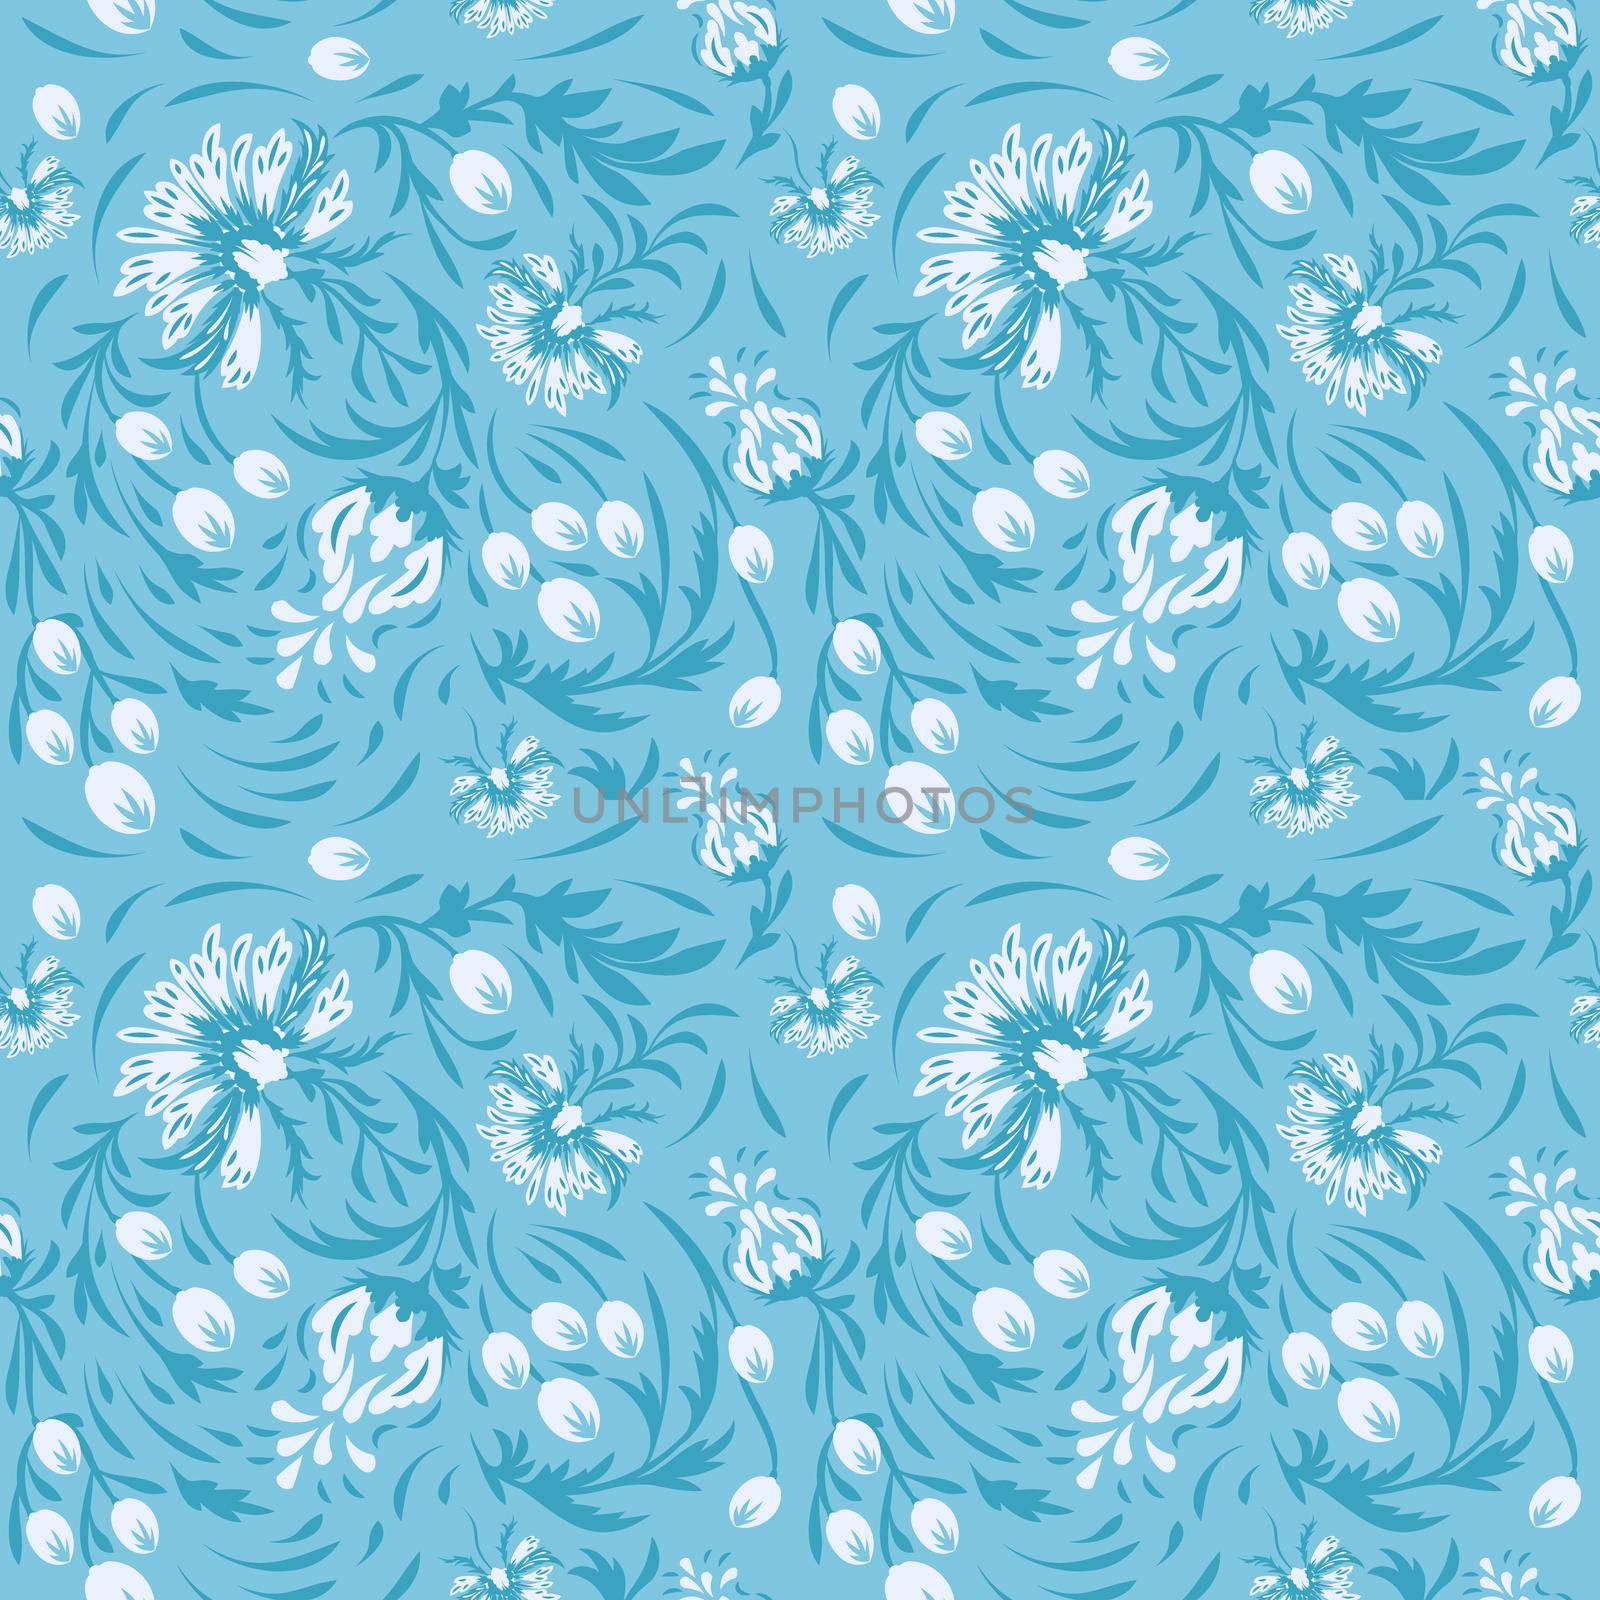 seamless floral folk pattern. slavic european style, bright colors, dark background. decorative flowers and ornaments, symmetric layout for interior or fashion textiles.